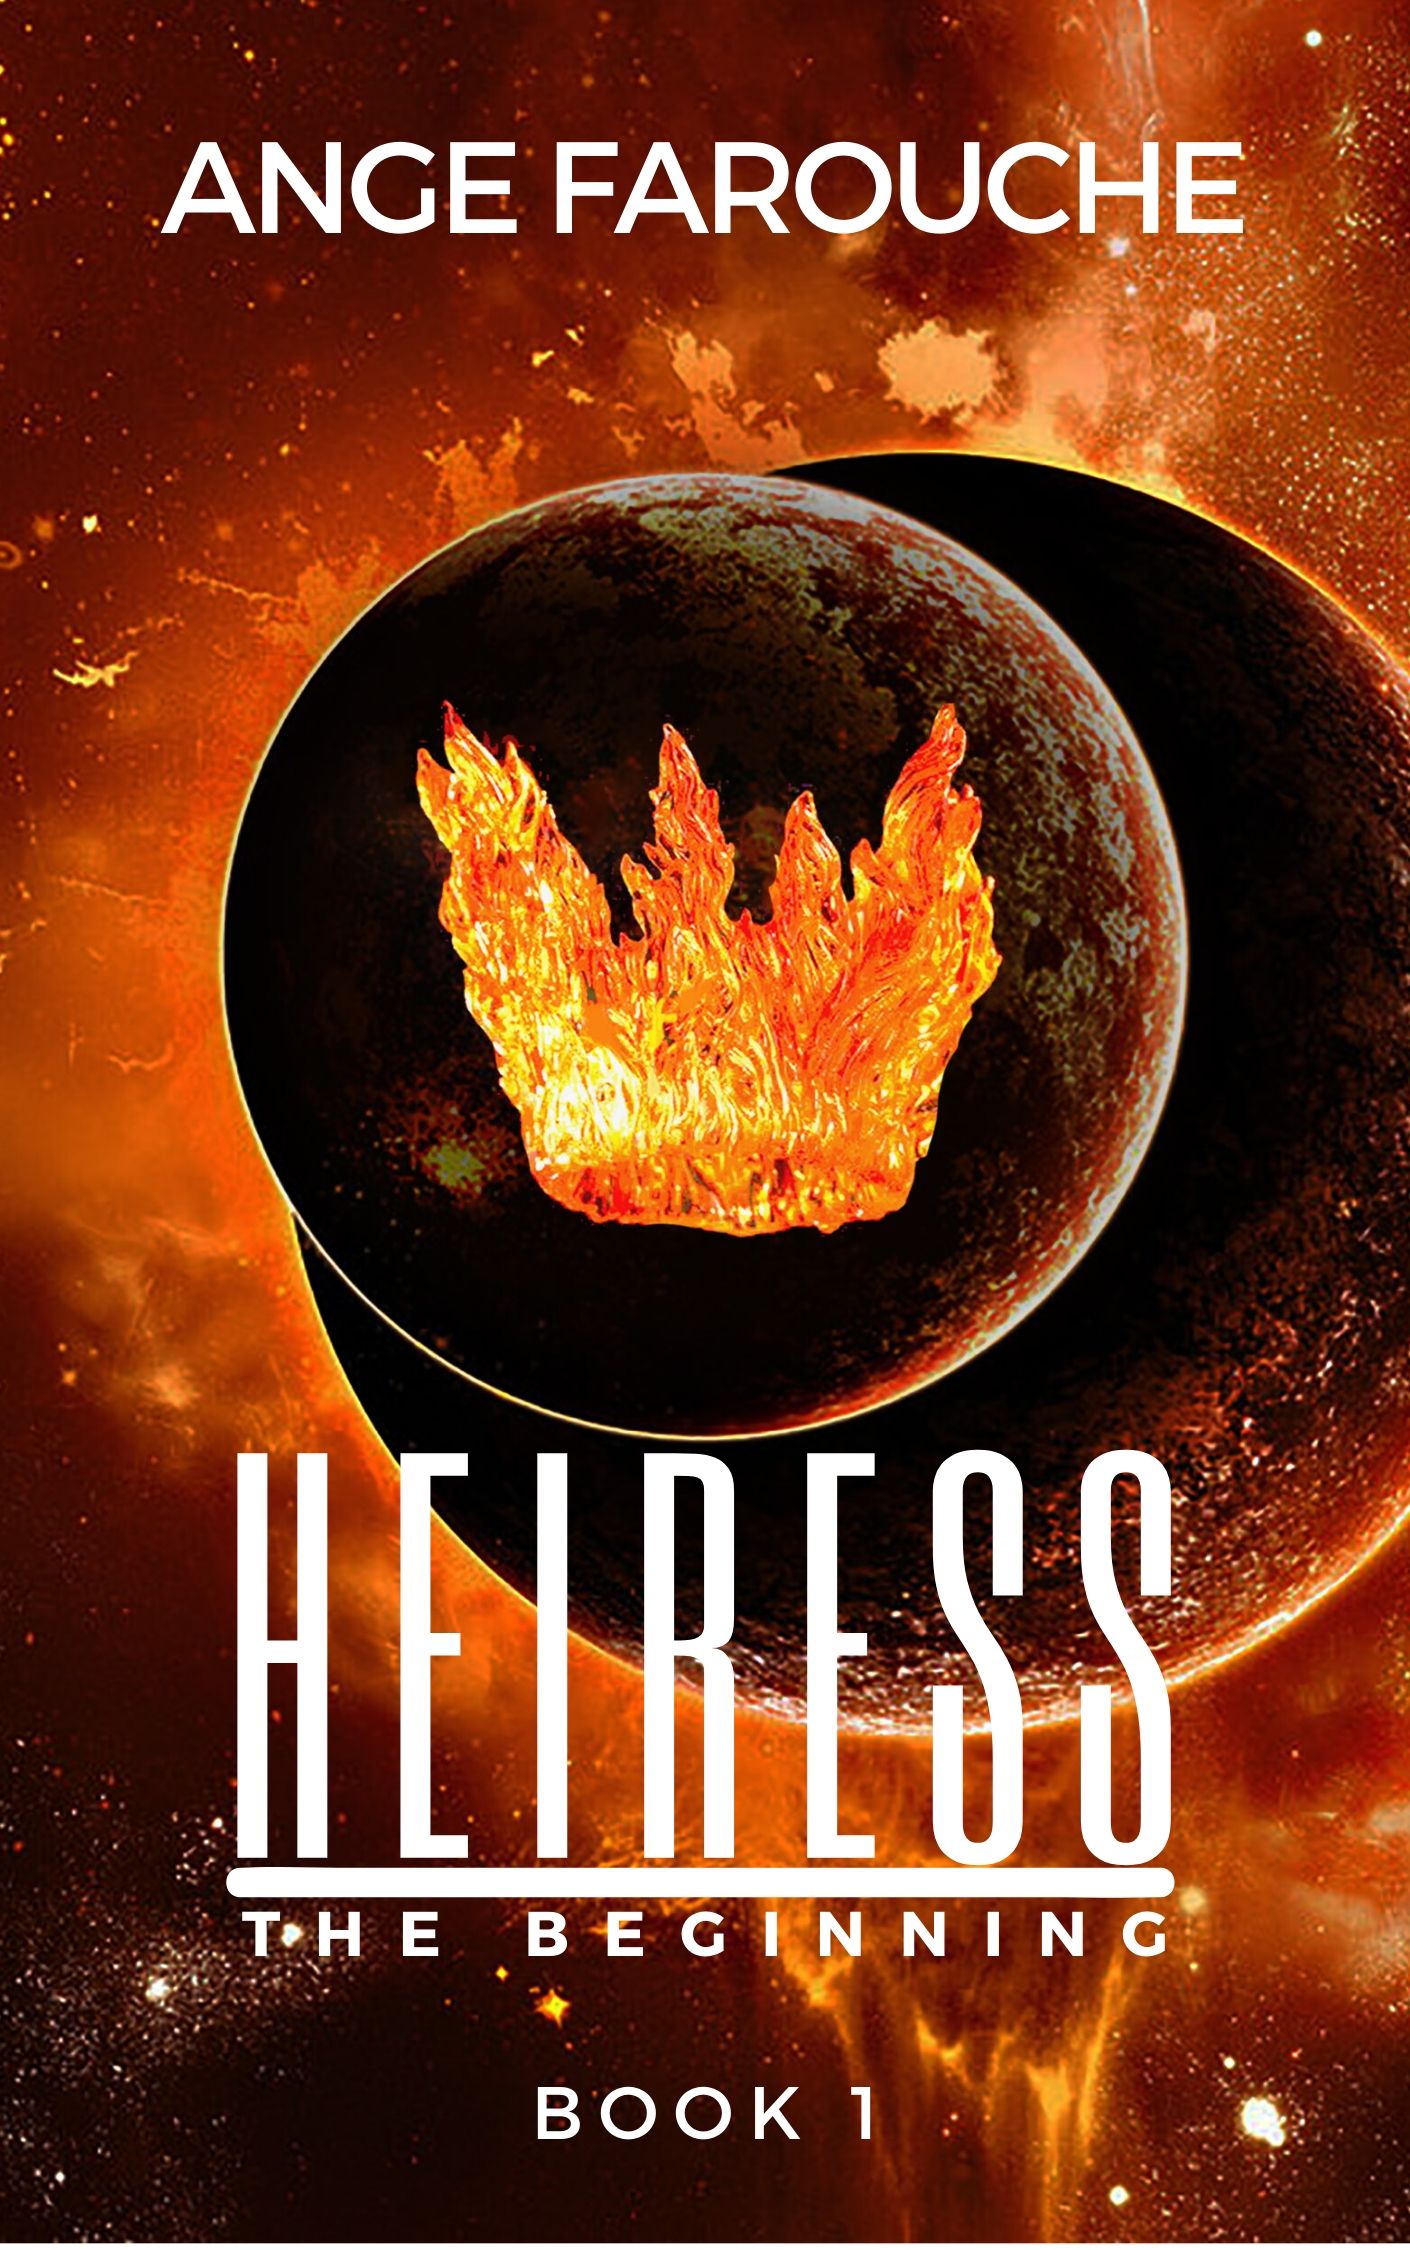 FREE: Heiress: The Beginning by Ange Farouche